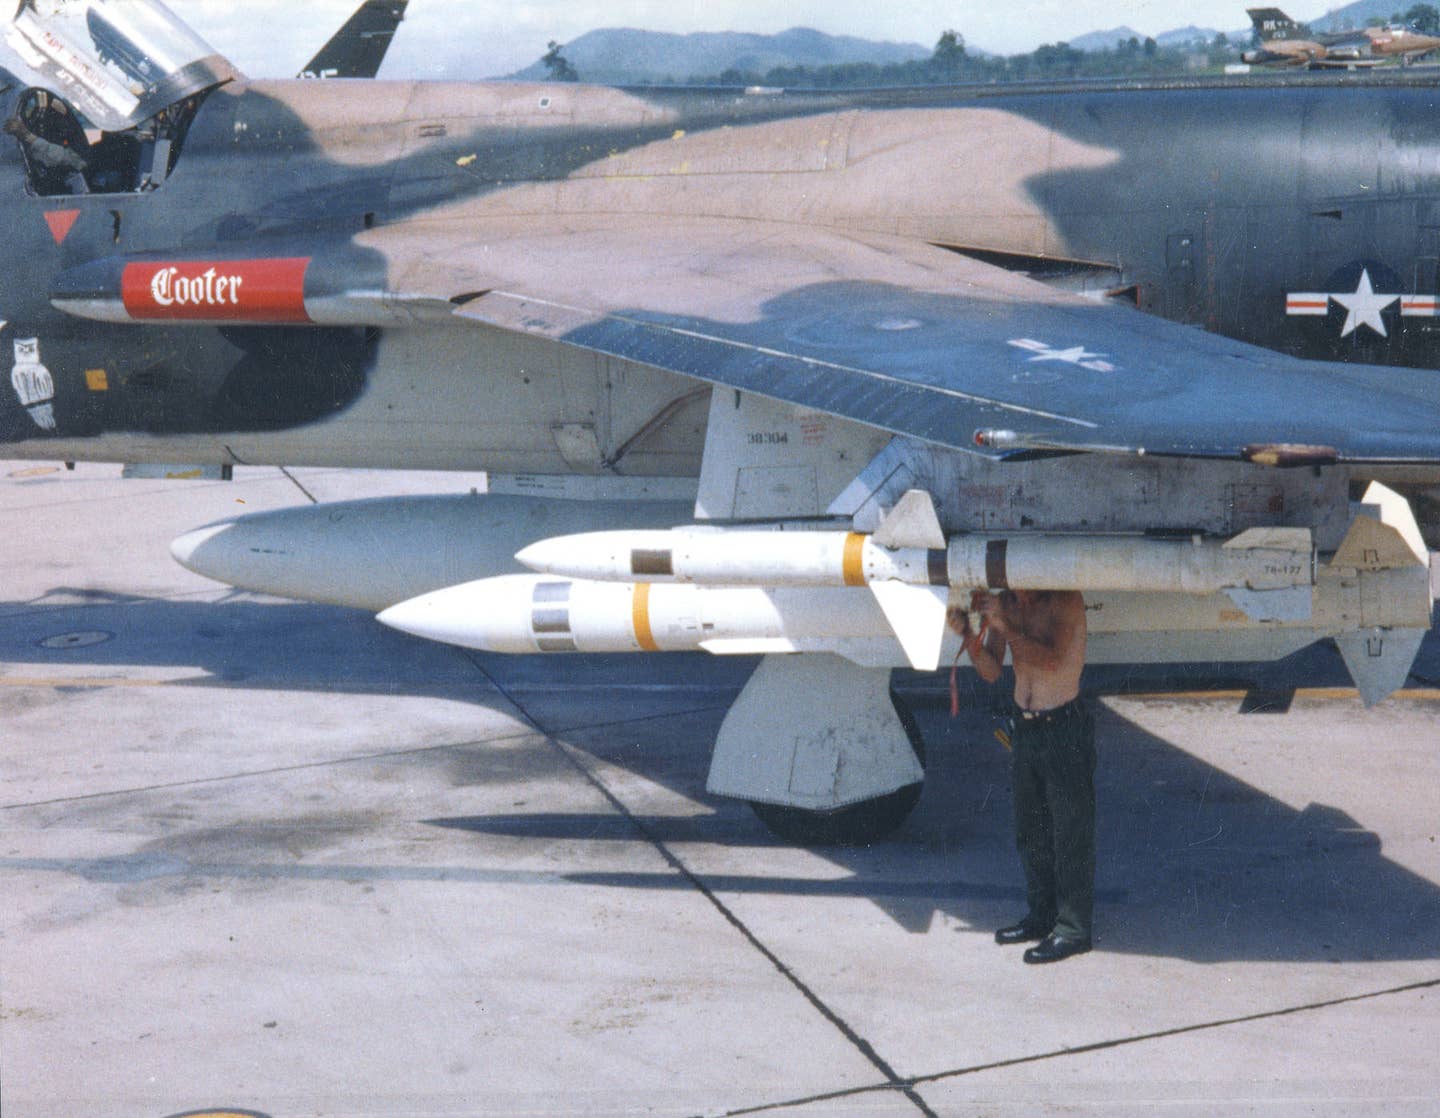 A U.S. Air Force armorer preparing an AGM-45 Shrike missile carried by an F-105G Thunderchief during the war in Southeast Asia. Just behind him is an AGM-78 Standard missile. <em>U.S. Air Force</em>